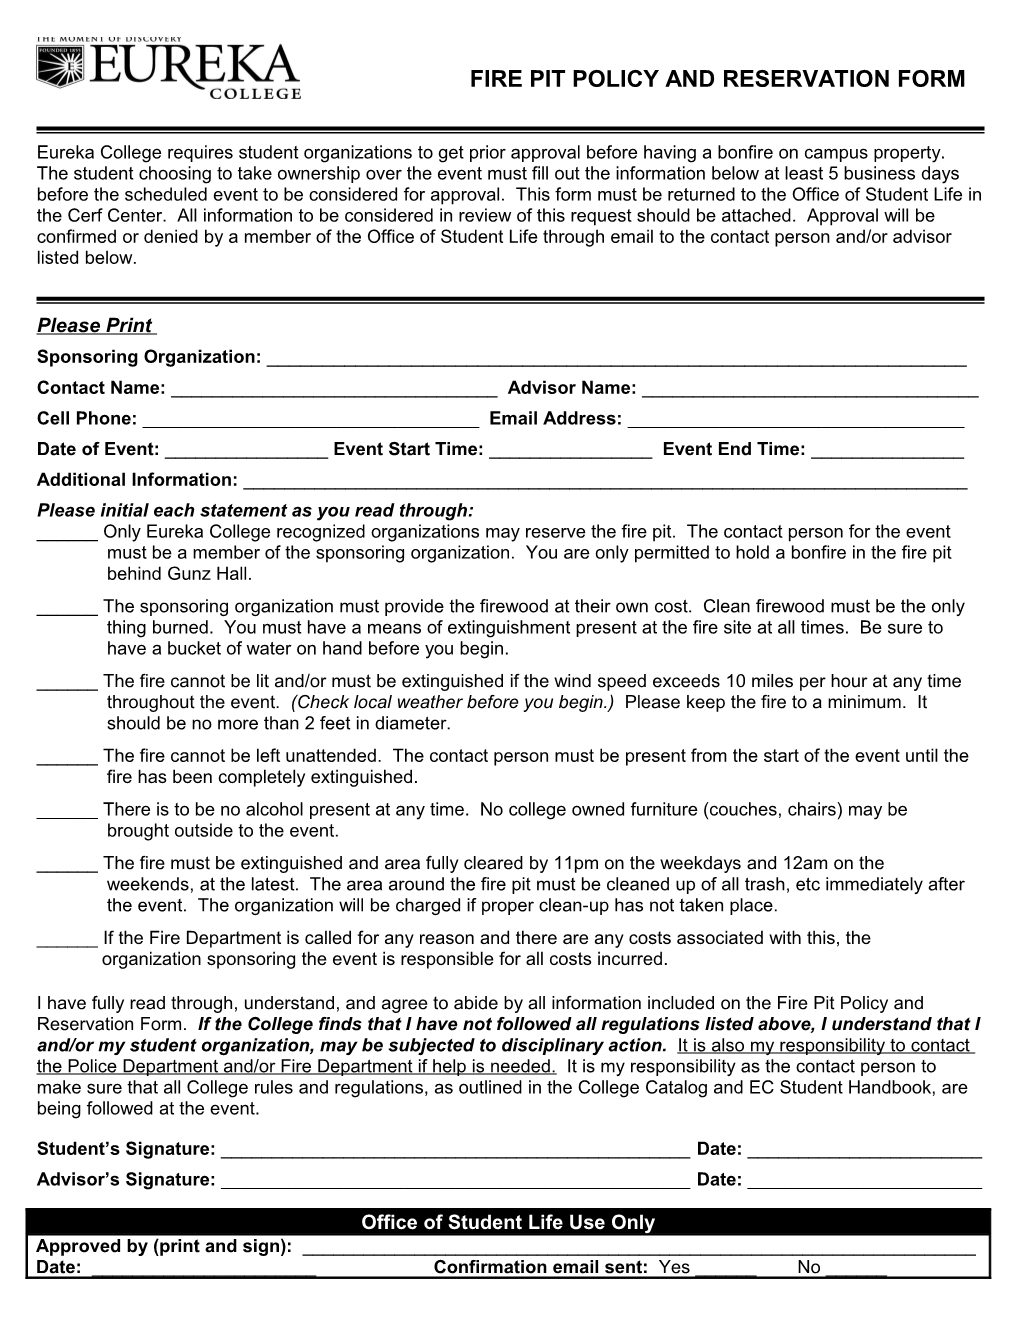 Fire Pit Policy and Reservation Form